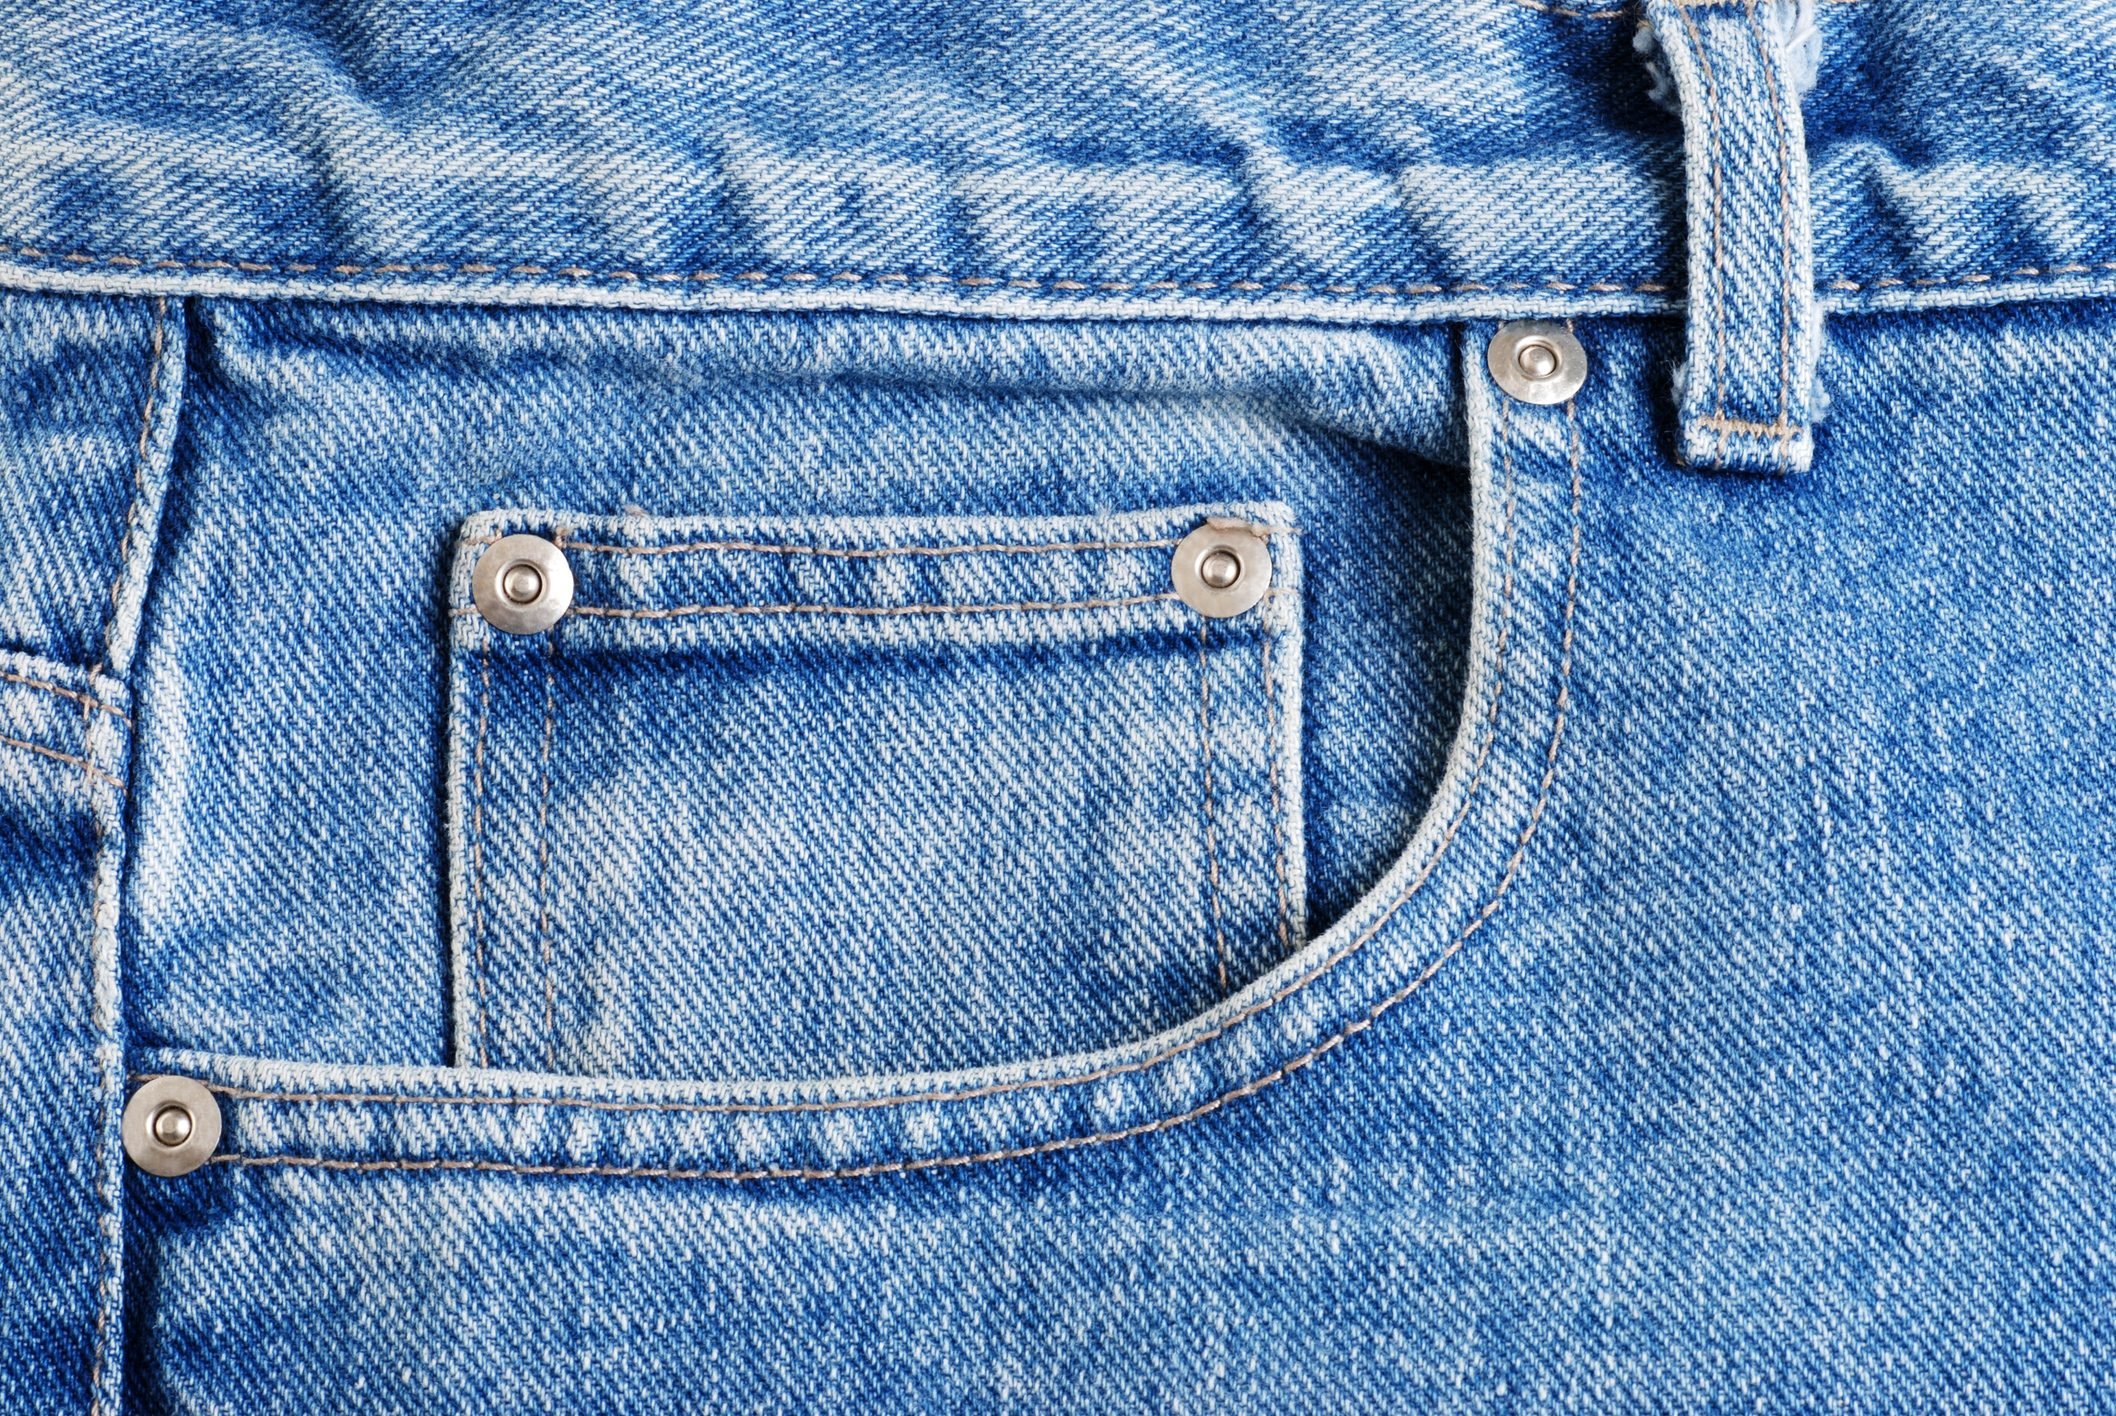 Why Do Jeans Have That Tiny Pocket?